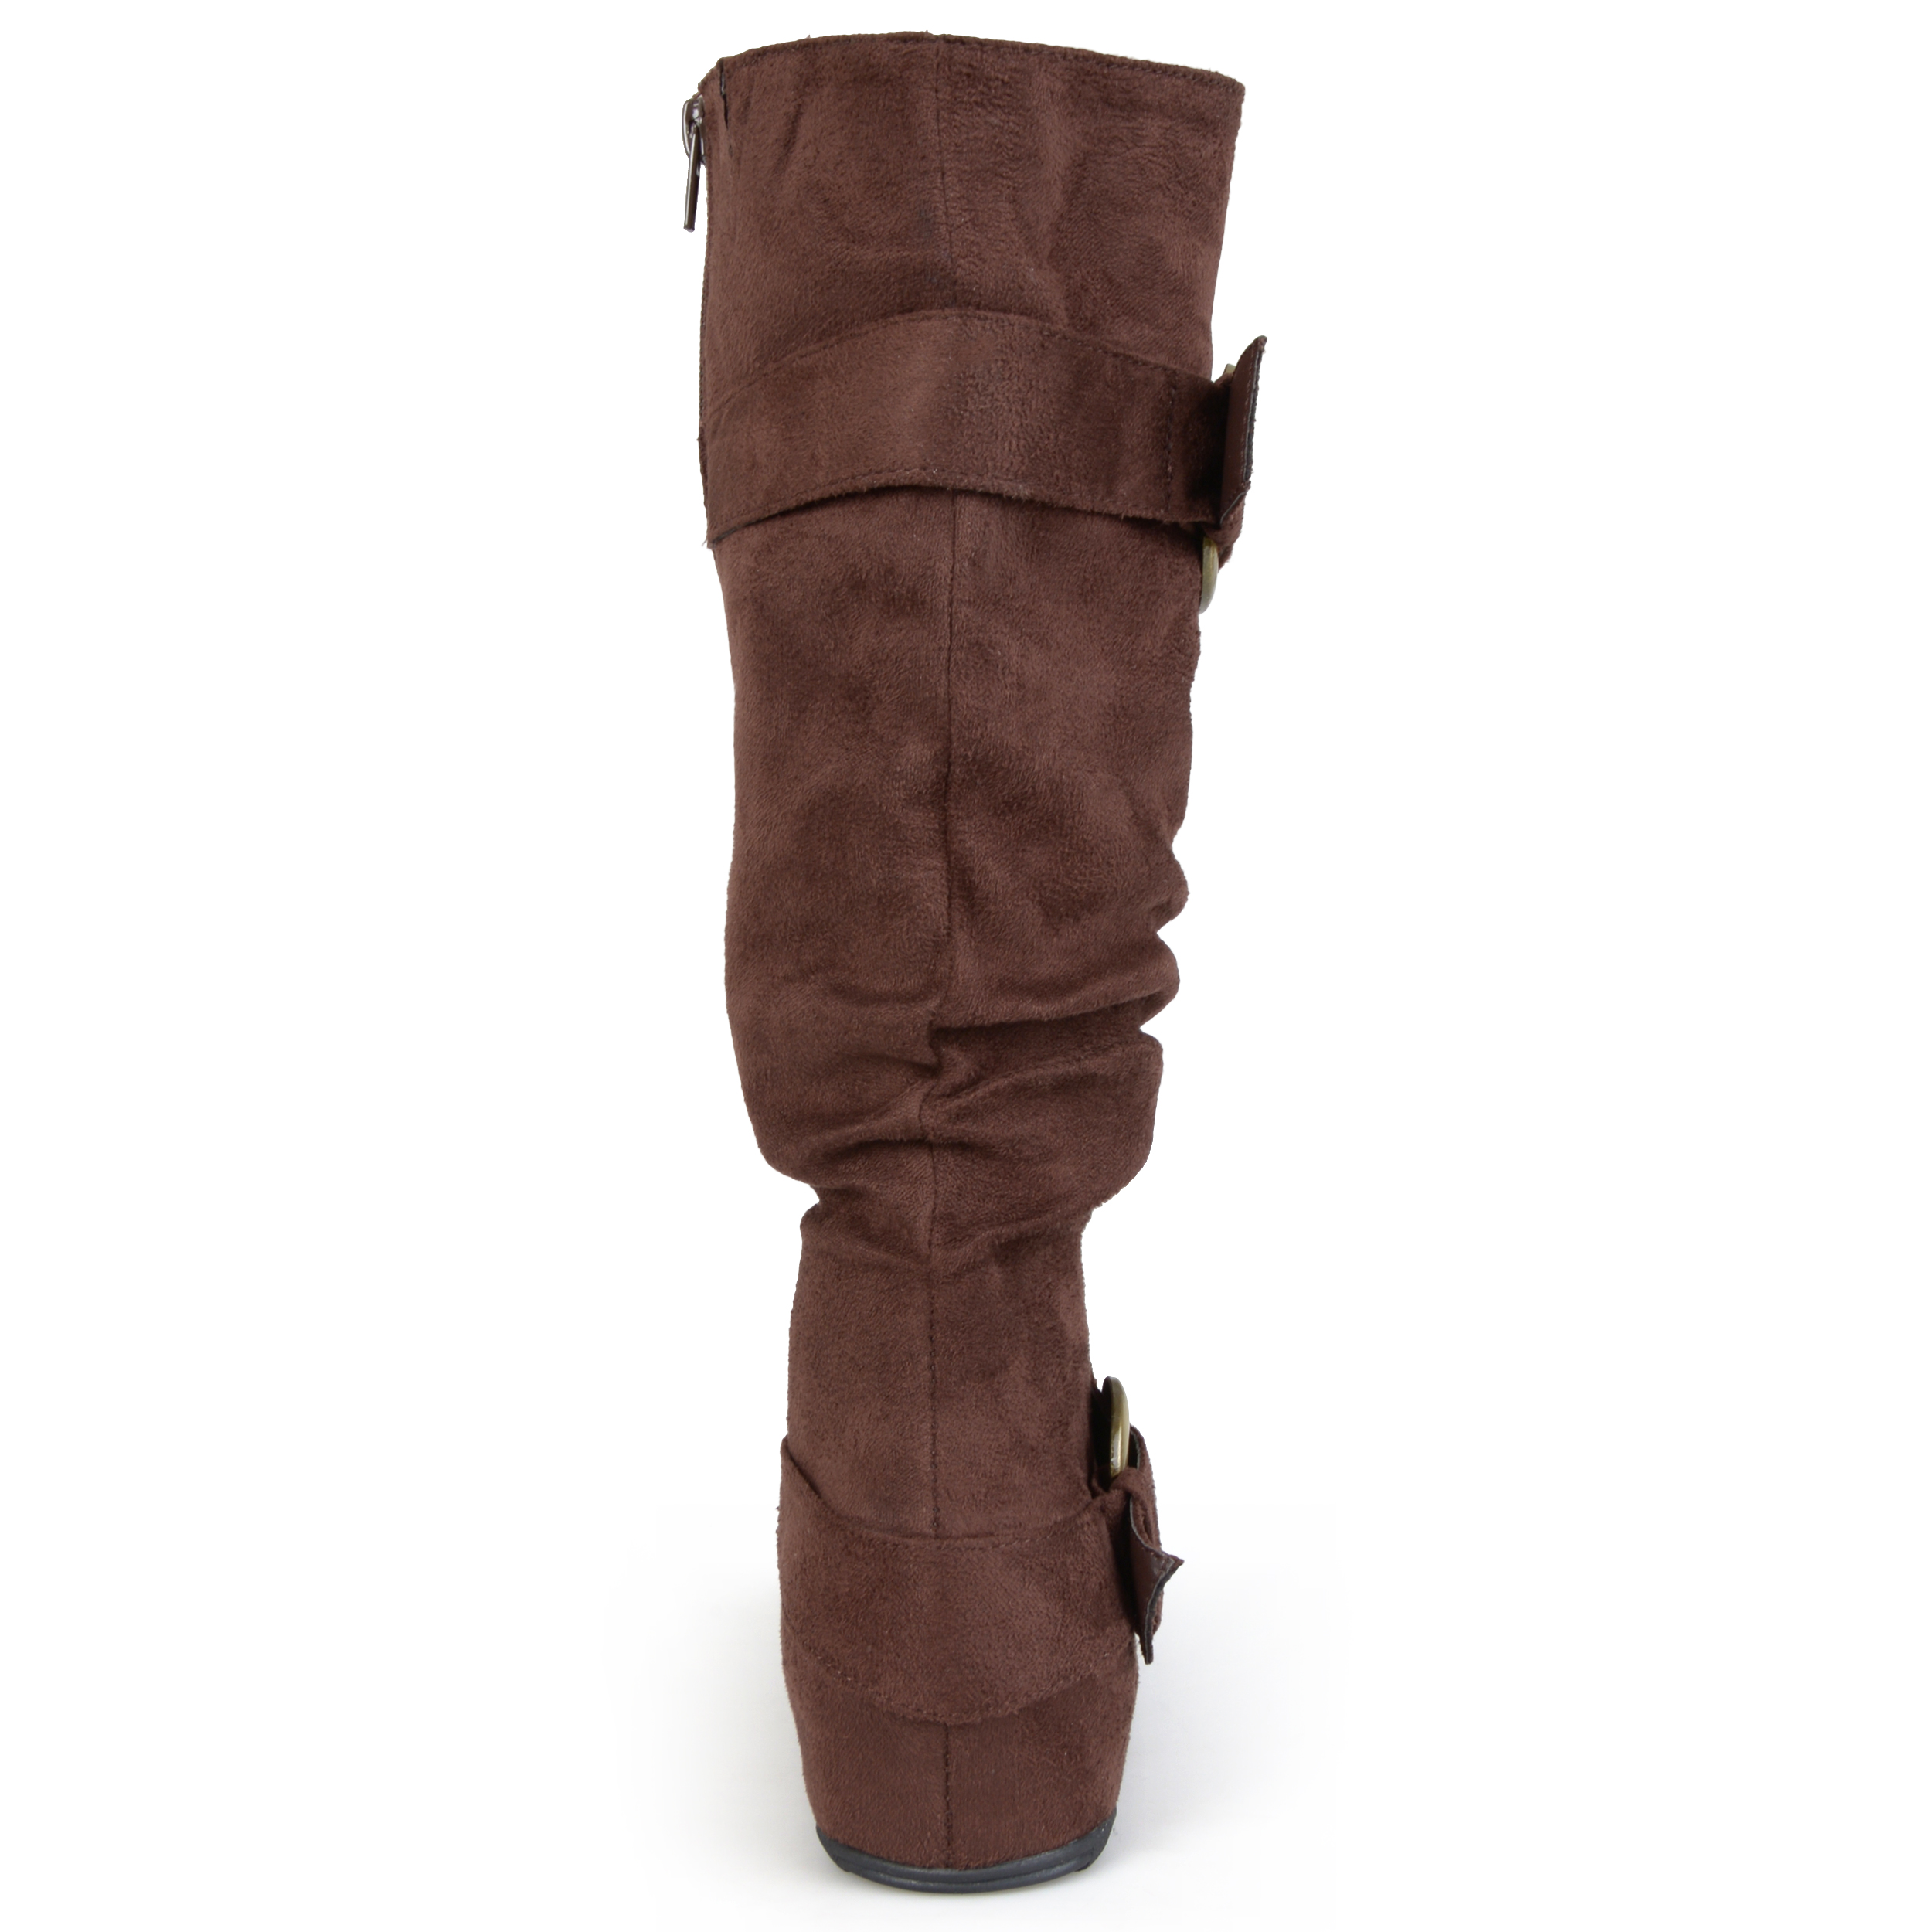 Brinley Co. Women's Extra Wide Calf Mid-Calf Slouch Riding Boots - image 4 of 8